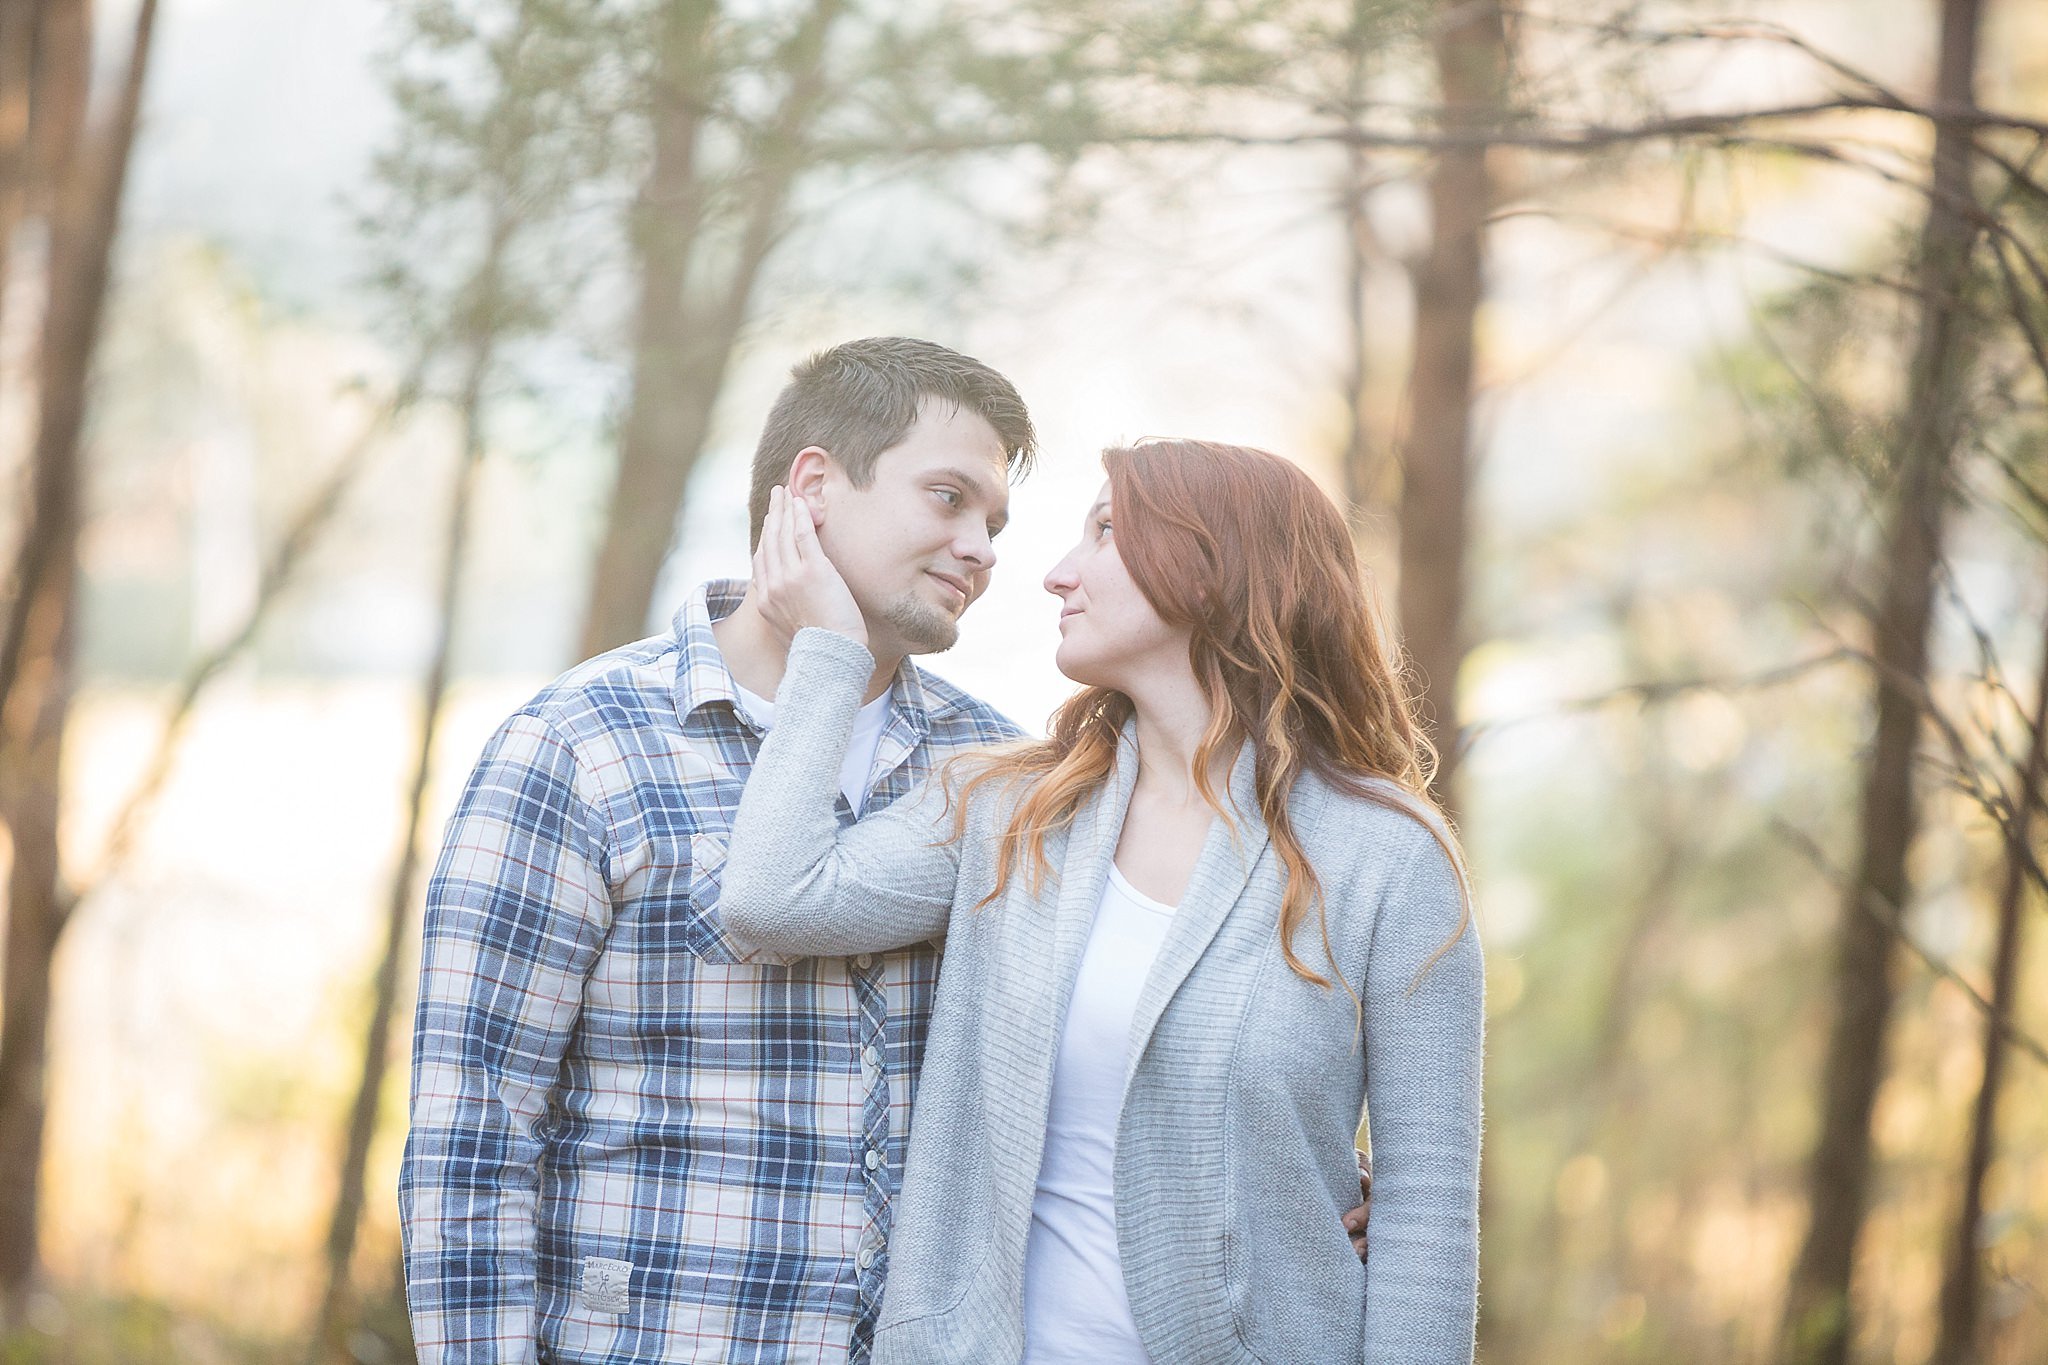 Jacob+Reanna's Engagement Session in Somerset, KY